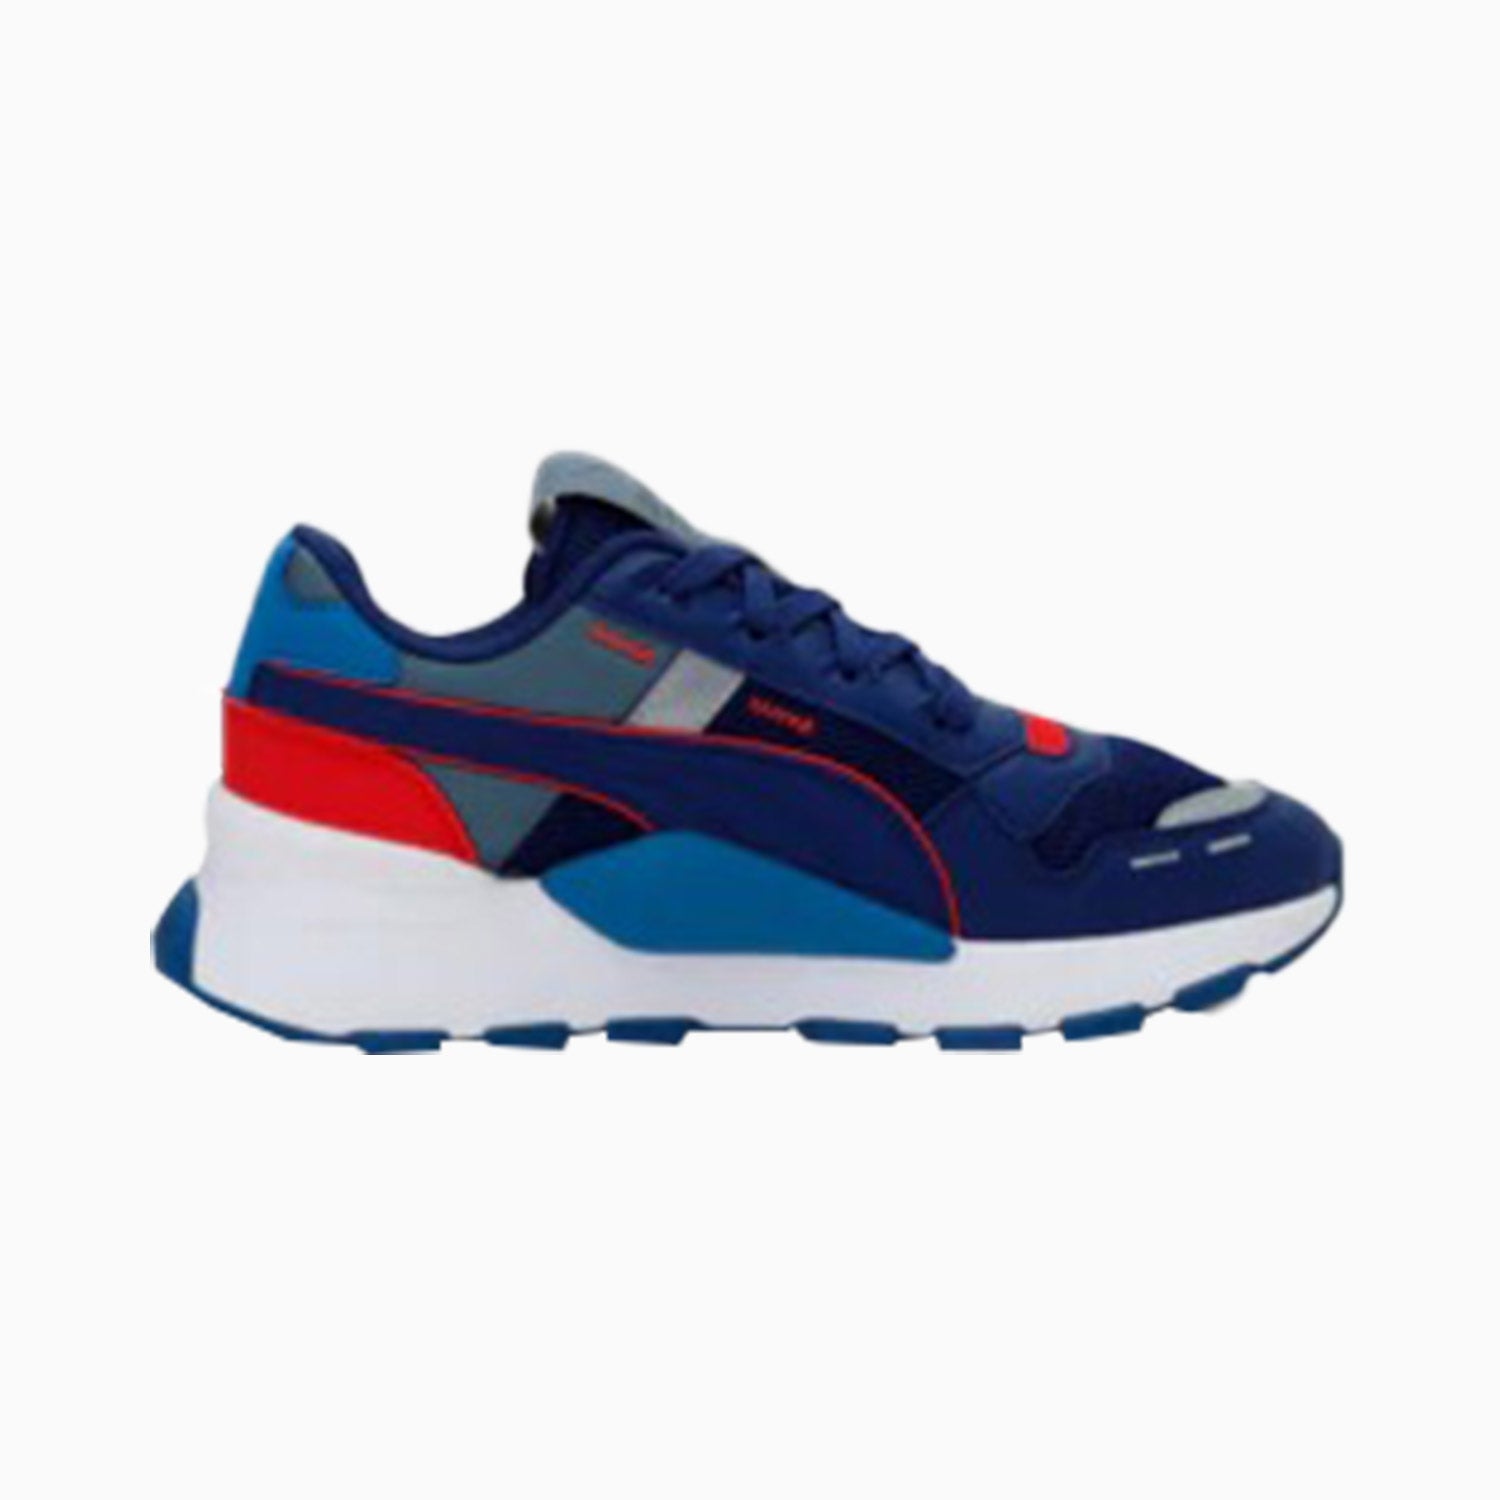 Puma Kid's RS 2.0 Arcade Amuse Toddlers - Color: BLUE - Tops and Bottoms USA -